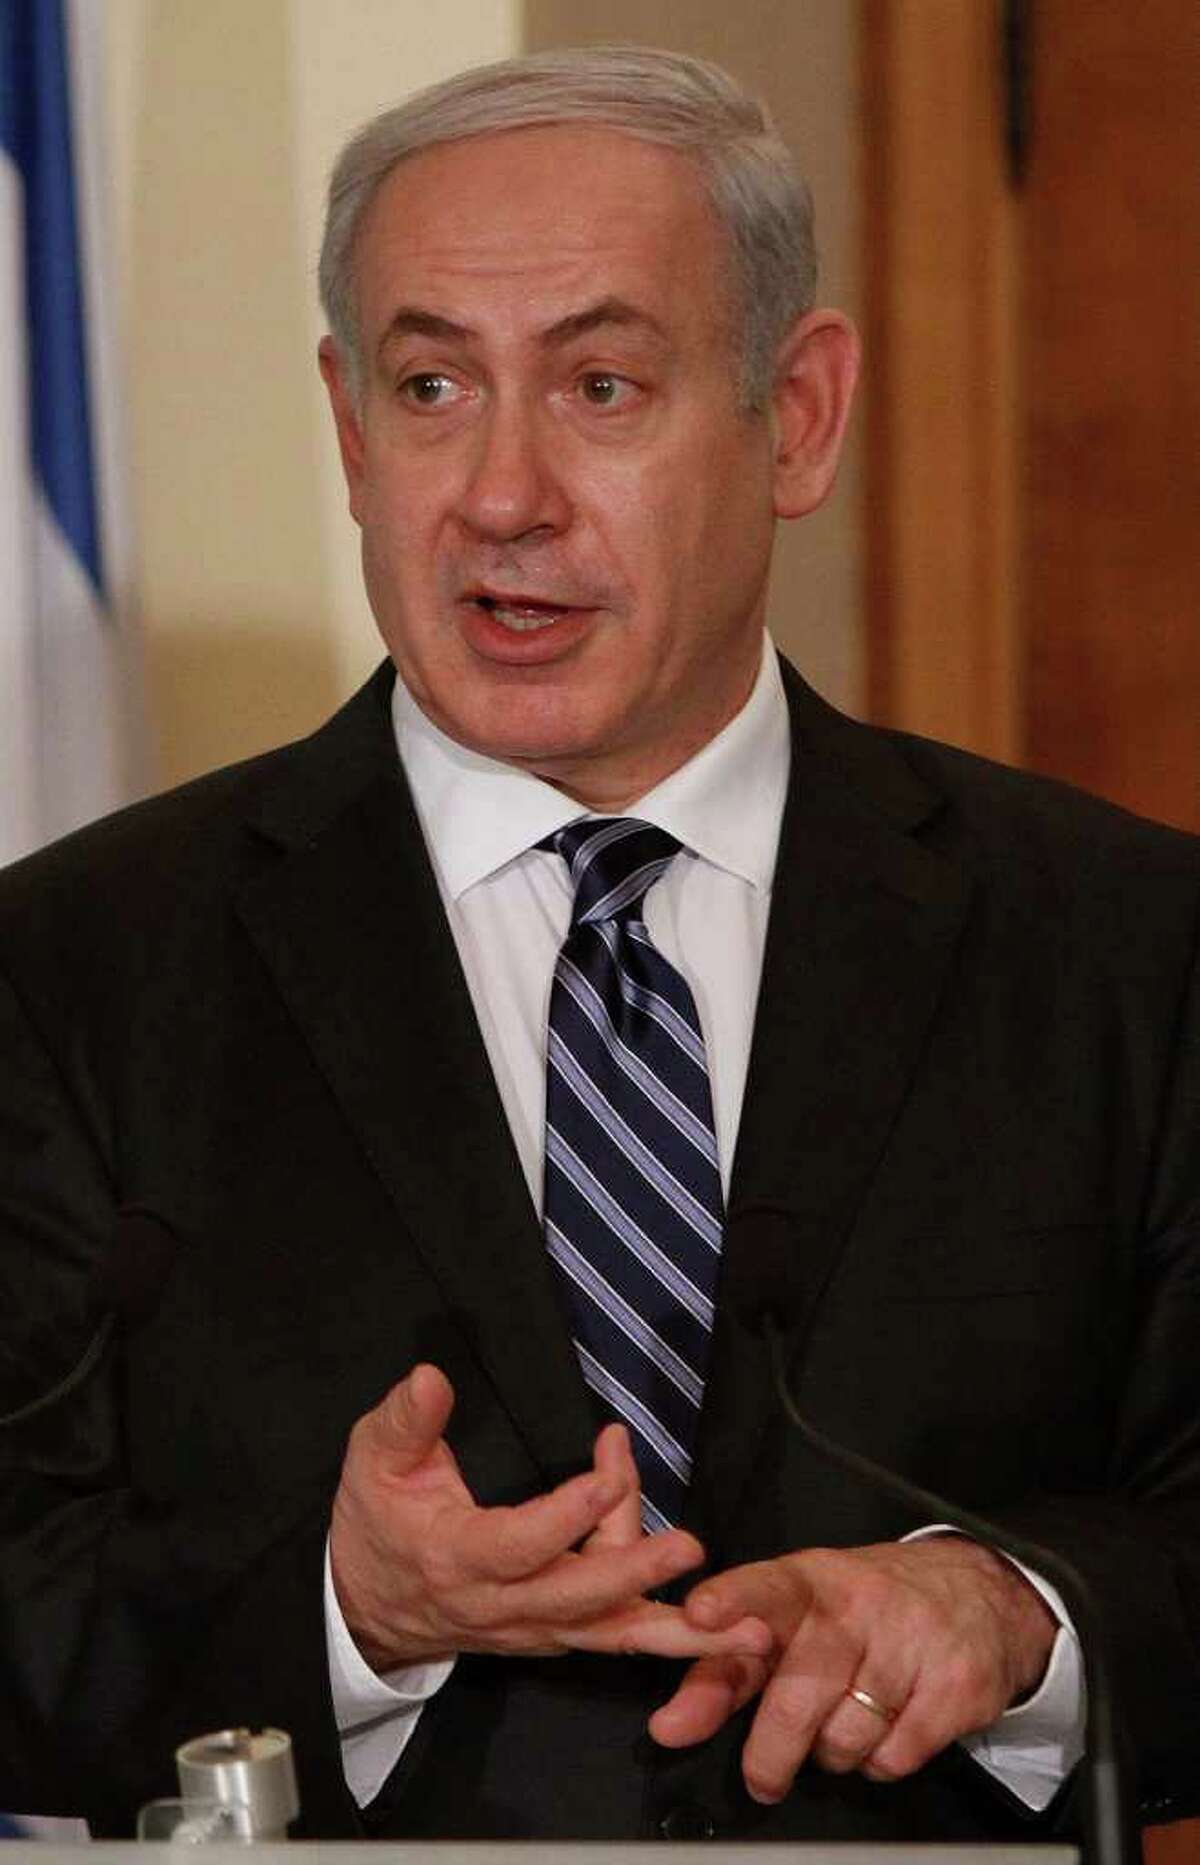 Israeli Prime Minister Benjamin Netanyahu speaks to the media during a press conference after meeting with Cyprus president Dimitris Christofias, at the presidential palace in divided capital Nicosia, Cyprus, Thursday, Feb. 16, 2012. Netanyahu said Thursday that the Iranian president's guided tour of centrifuges at Tehran research reactor on Wednesday was proof that sanctions have not properly crippled Iran's efforts to develop nuclear capabilities.